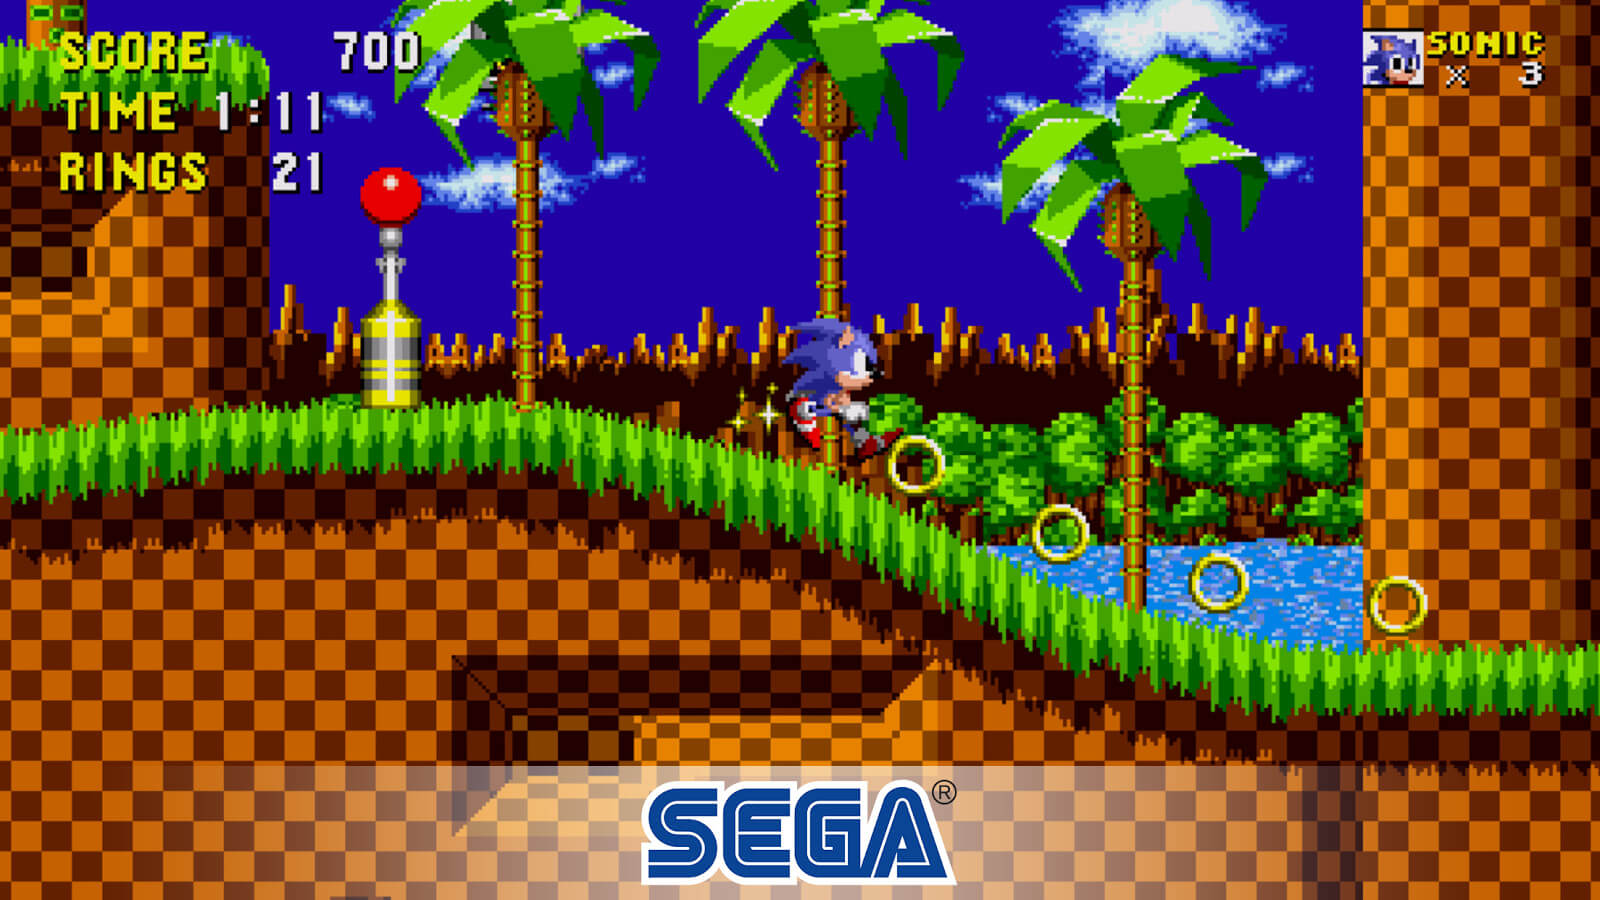 Sonic.exe 3 am is it real